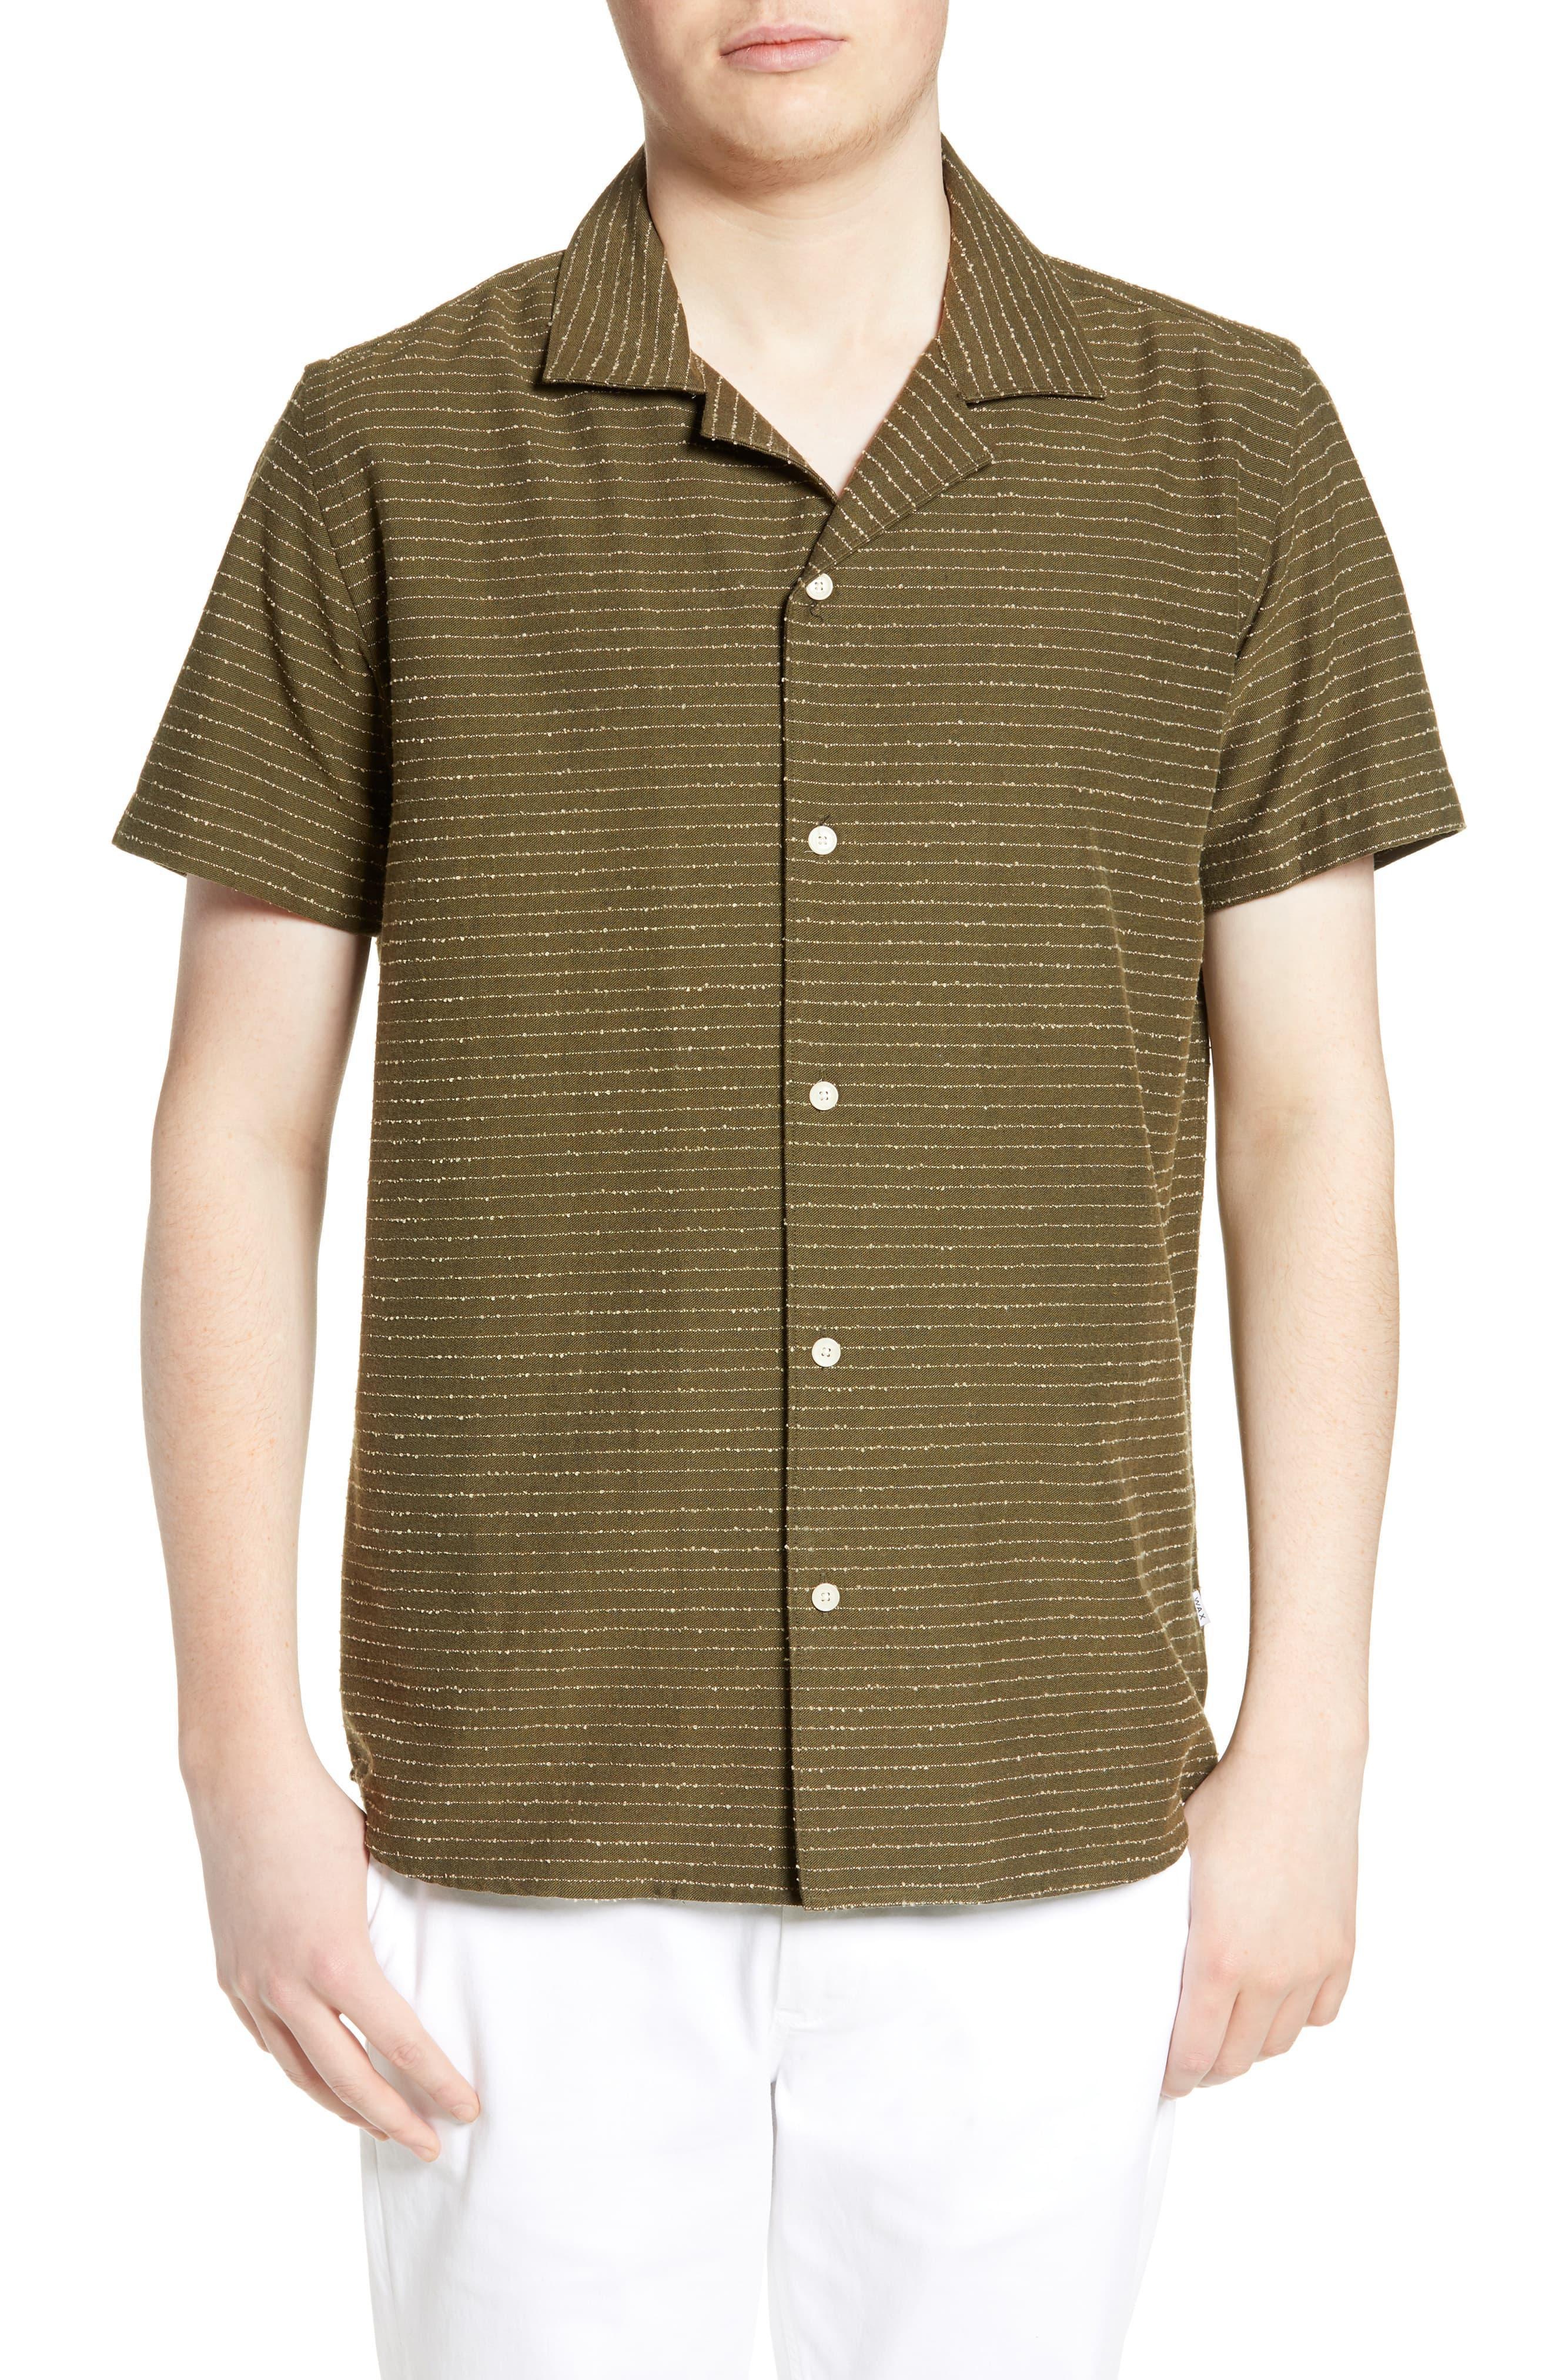 Wax London Didcot Stripe Slim Fit Camp Shirt in Green for Men - Lyst